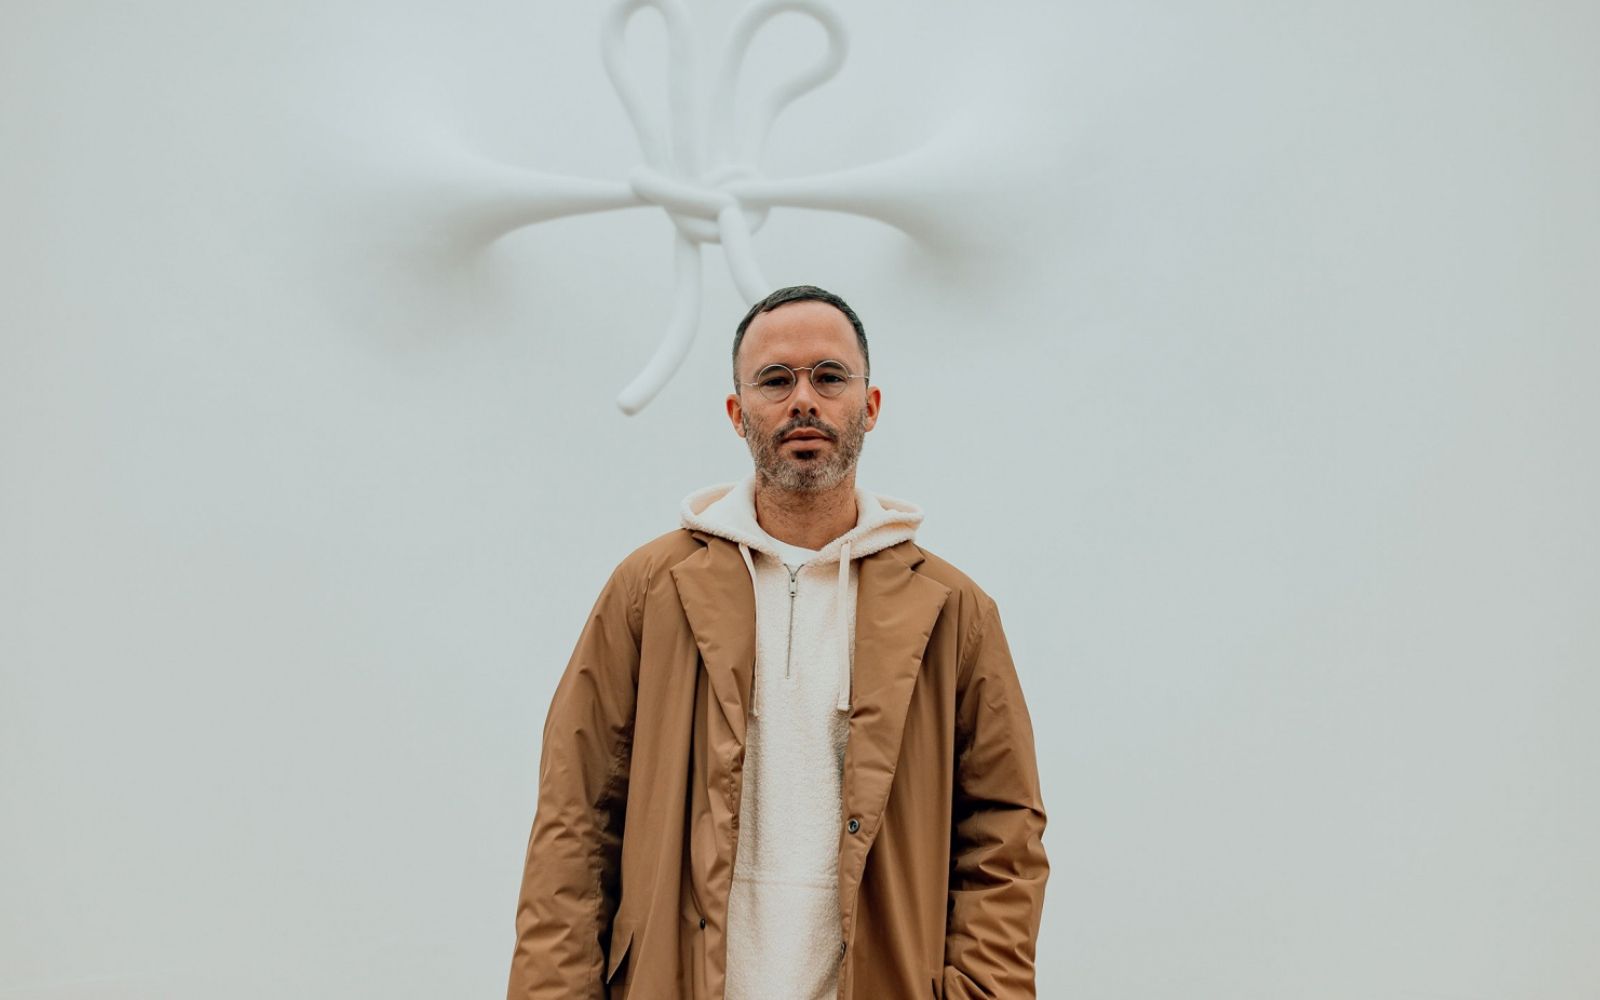 Playing with Perception: A Conversation with Daniel Arsham - Sculpture